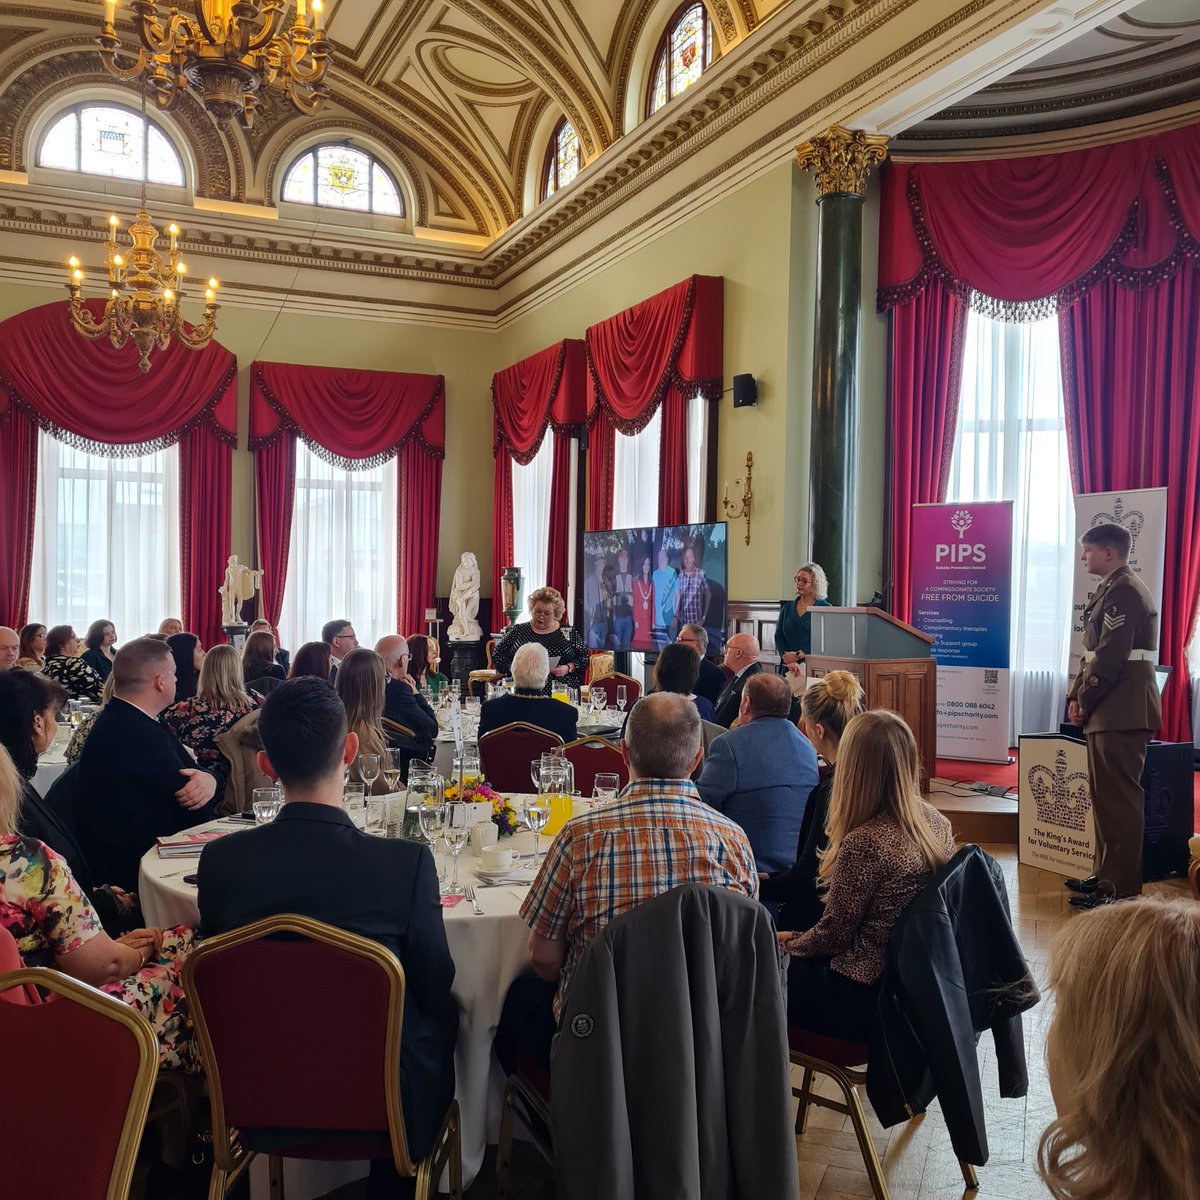 At @NICVA, we love to celebrate & recognise the incredible impact our members have. It's inspiring to see @PipsCharity awarded the Kings Award for Voluntary Service today. They do amazing work & we're proud to have them as a member. Congratulations! #ValueoftheSector